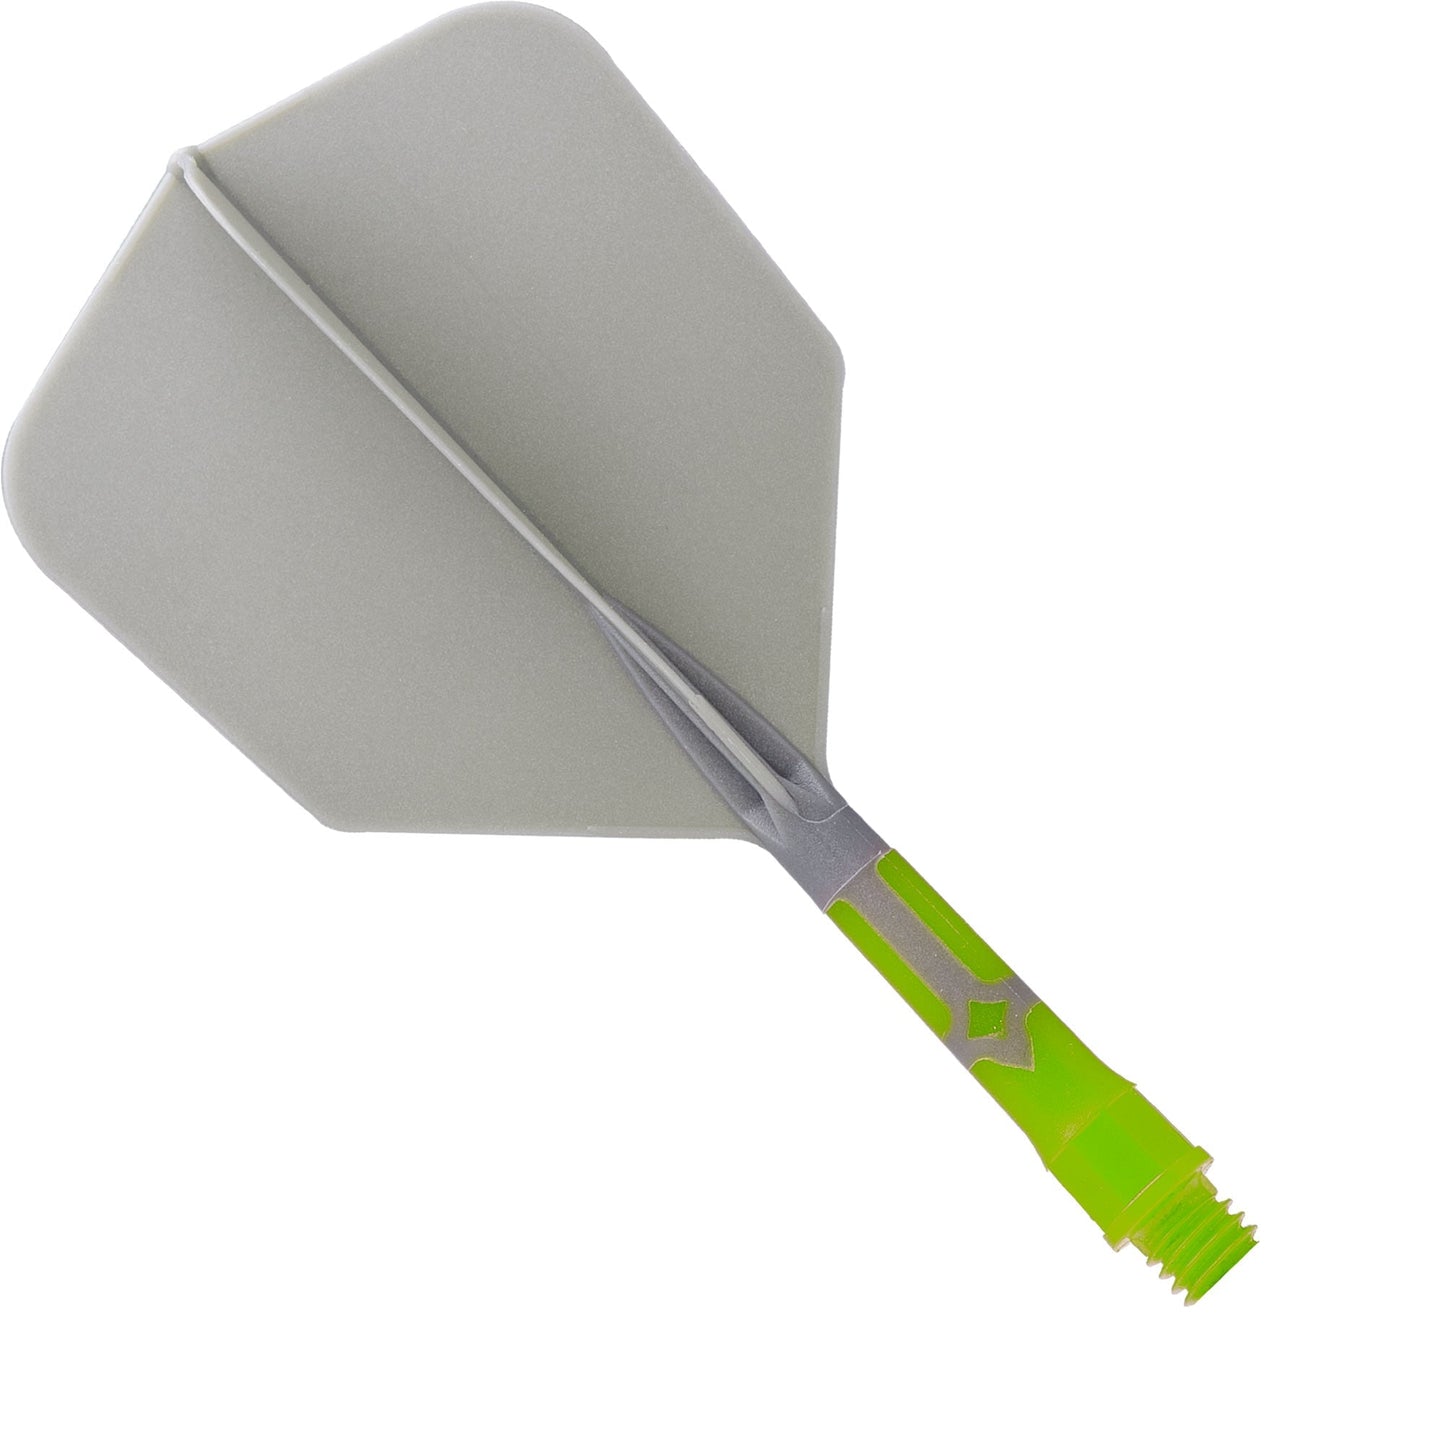 Cuesoul Rost T19 Integrated Dart Shaft and Flights - Big Wing - Lime Green with Grey Flight Short